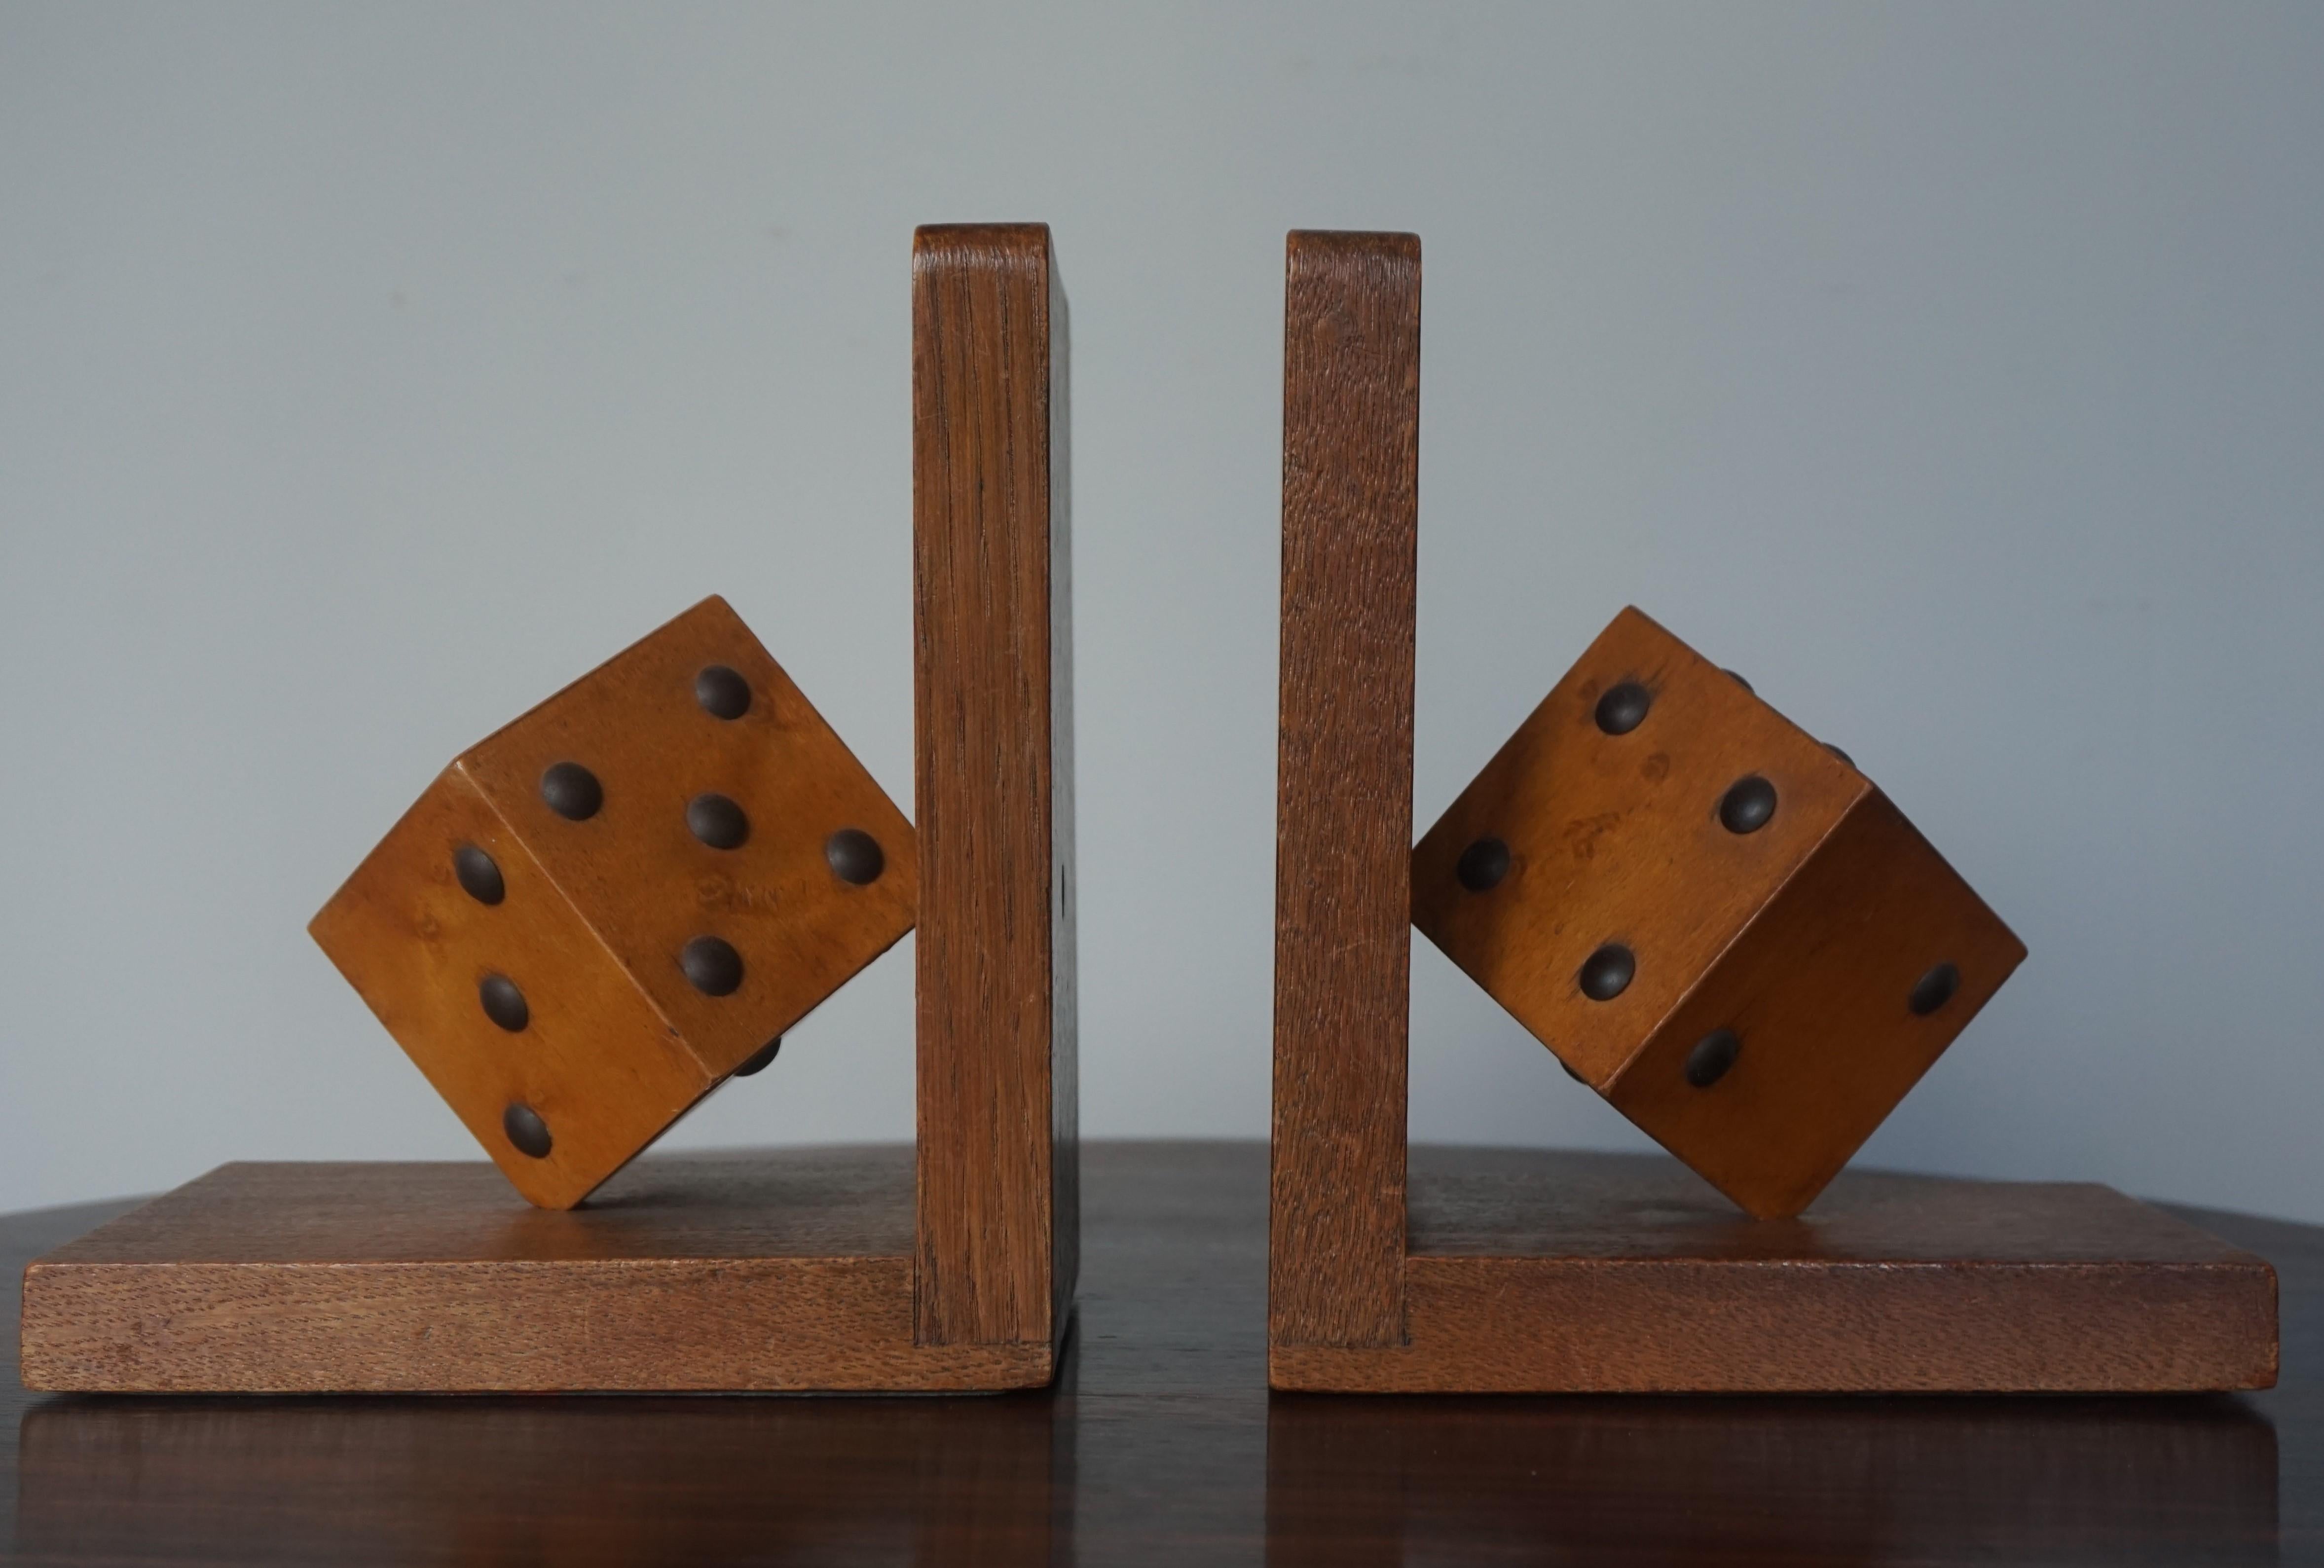 Rare and highly decorative pair of antique bookends for the gambling man.

These handcrafted bookends from the earliest years of the twentieth century are practical in size and they come with a beautiful pair of dice made of nutwood and metal nails.